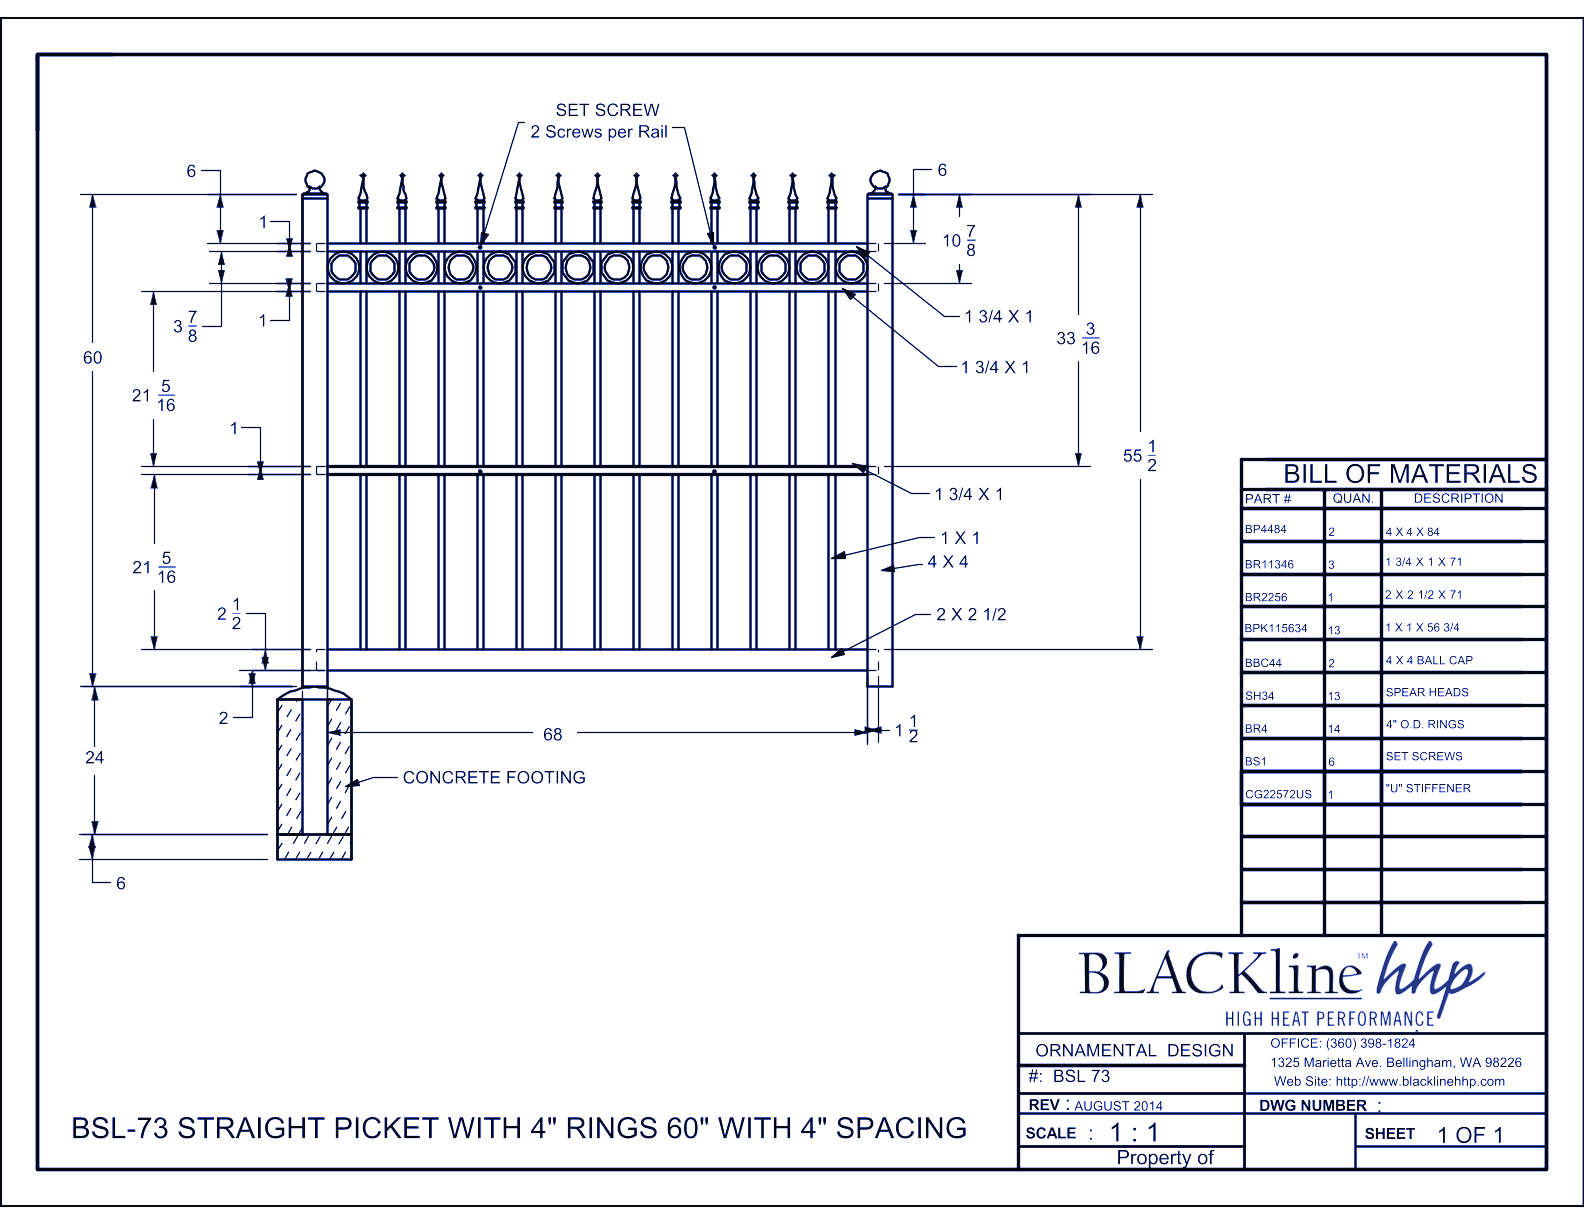 BSL-73: Straight Picket with 4" Rings 60" with 4" Spacing